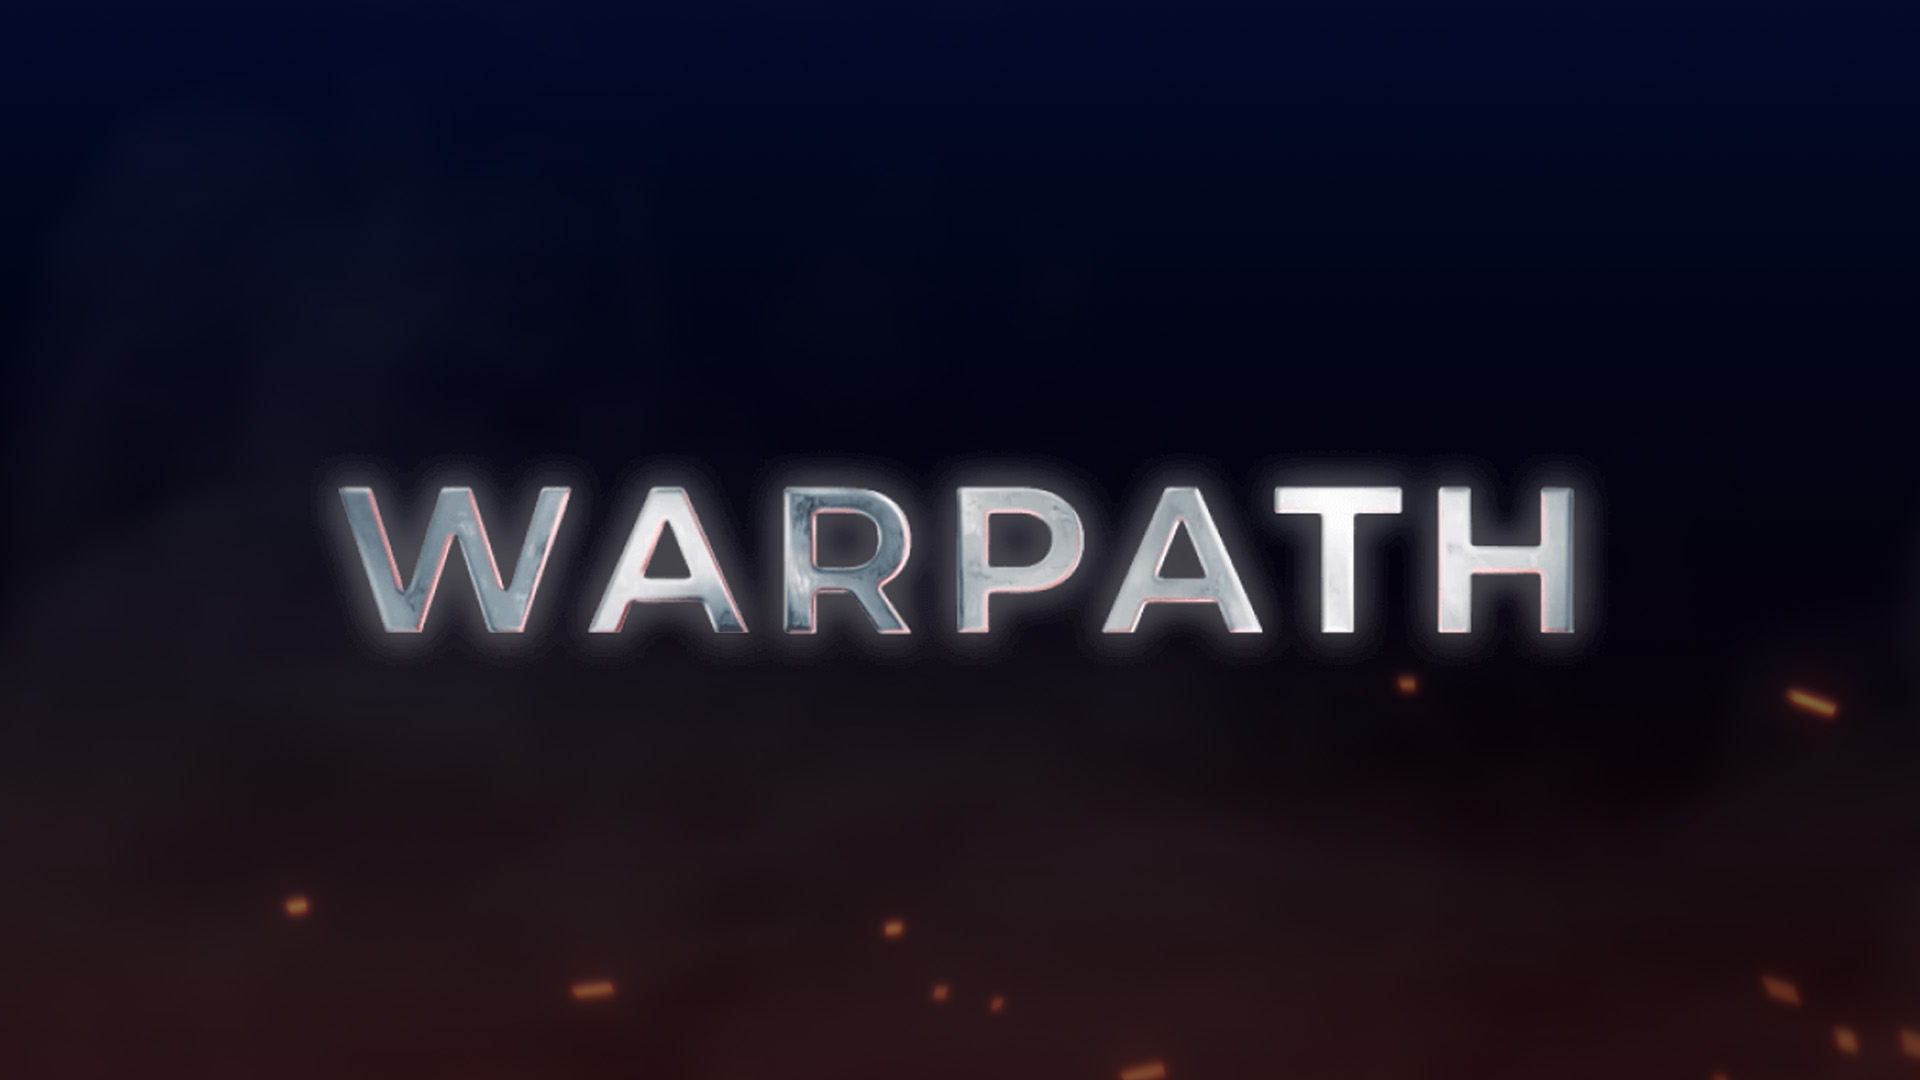 Warpath: Winning the War For Sexual Integrity (For Men)

Meeting at Grace Church
Monday | 6:30pm
February 5 - August 19
